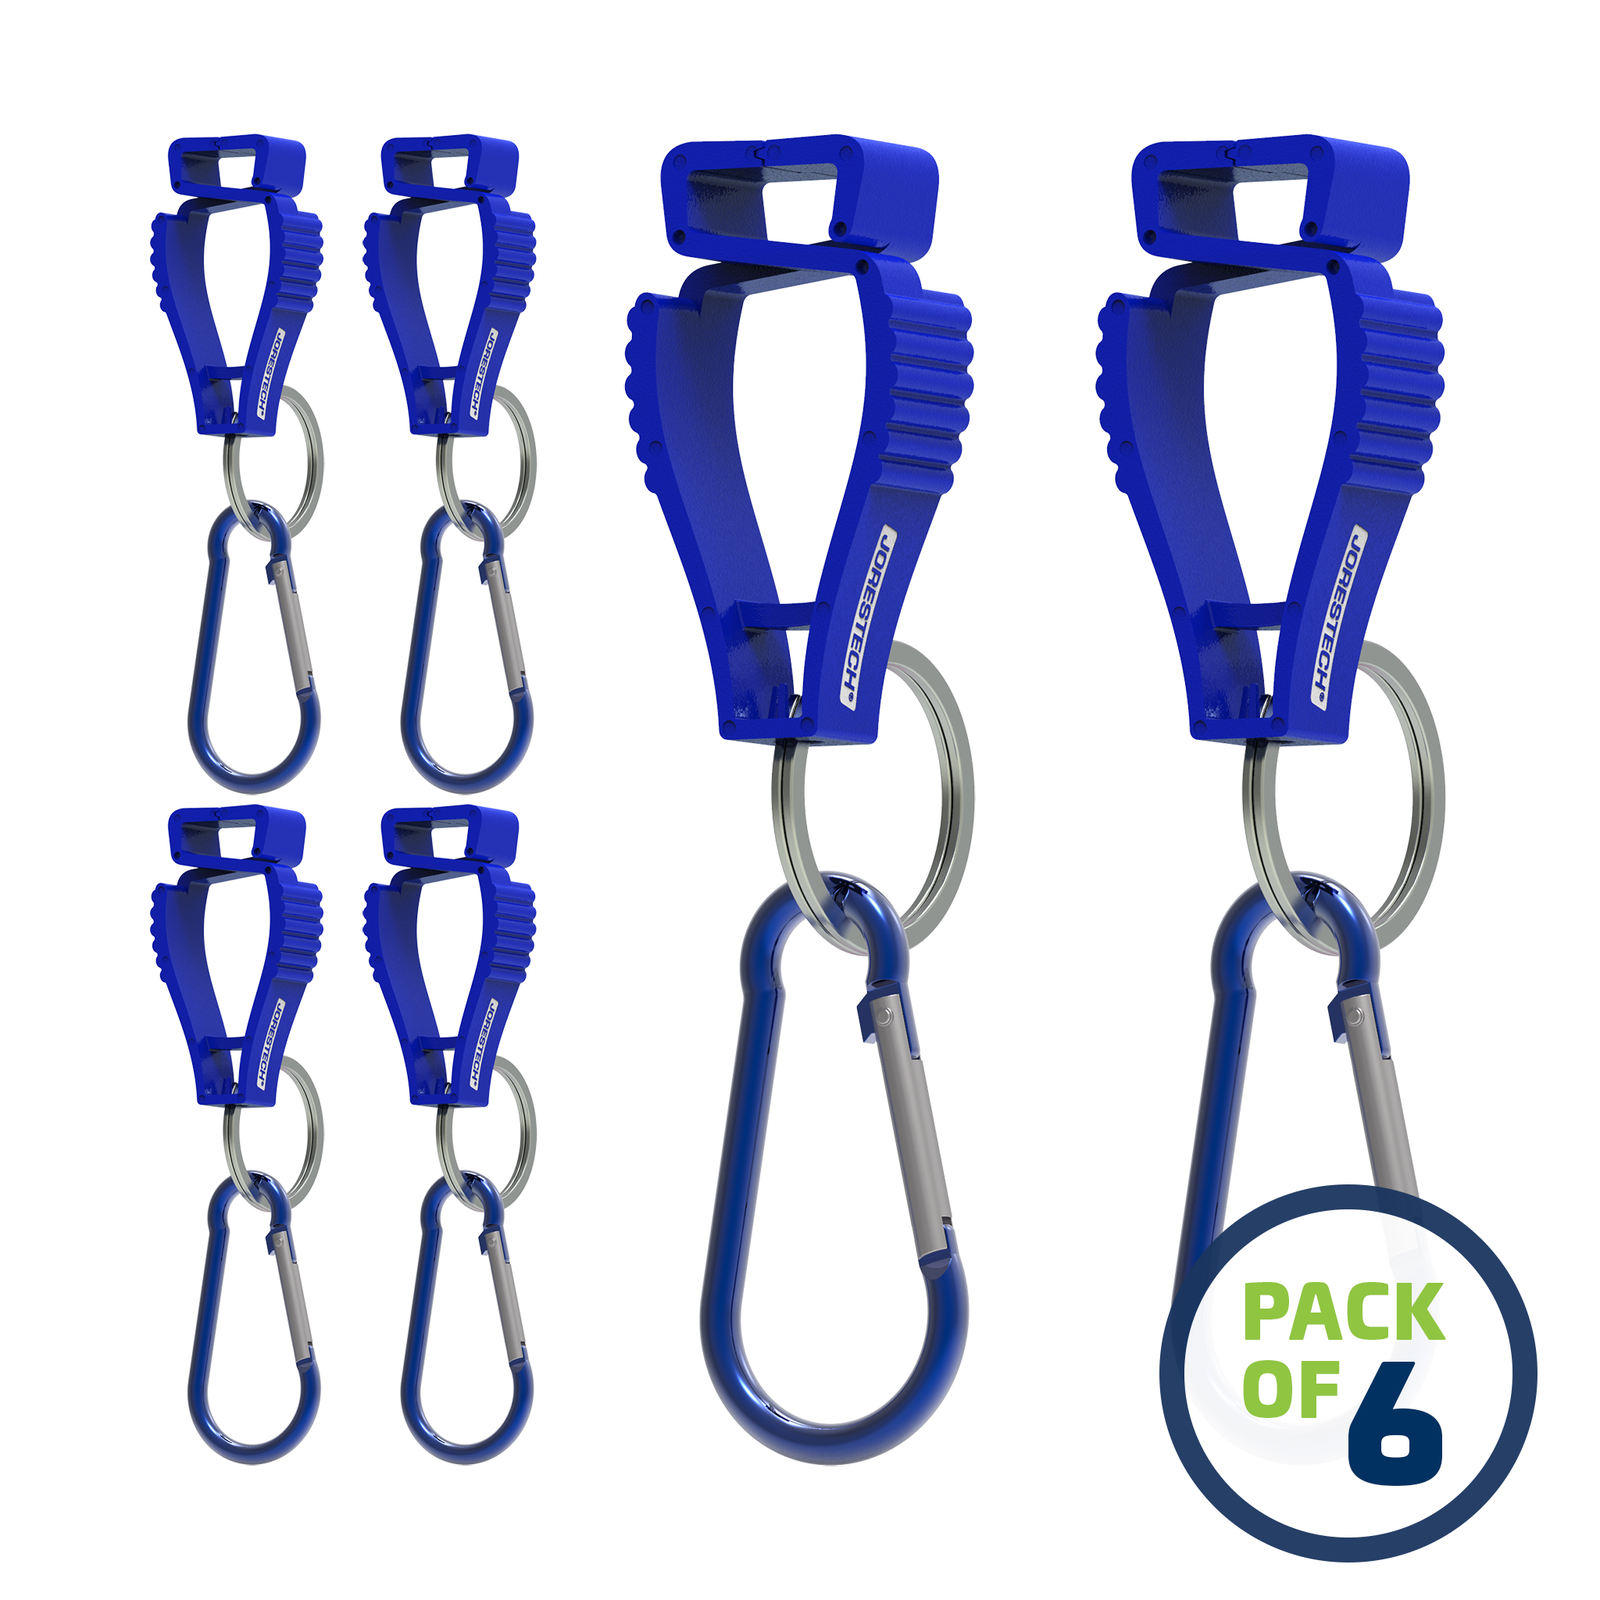 image of a pack of 6 Blue JORESTECH glove clip safety holders with carabiner over white background